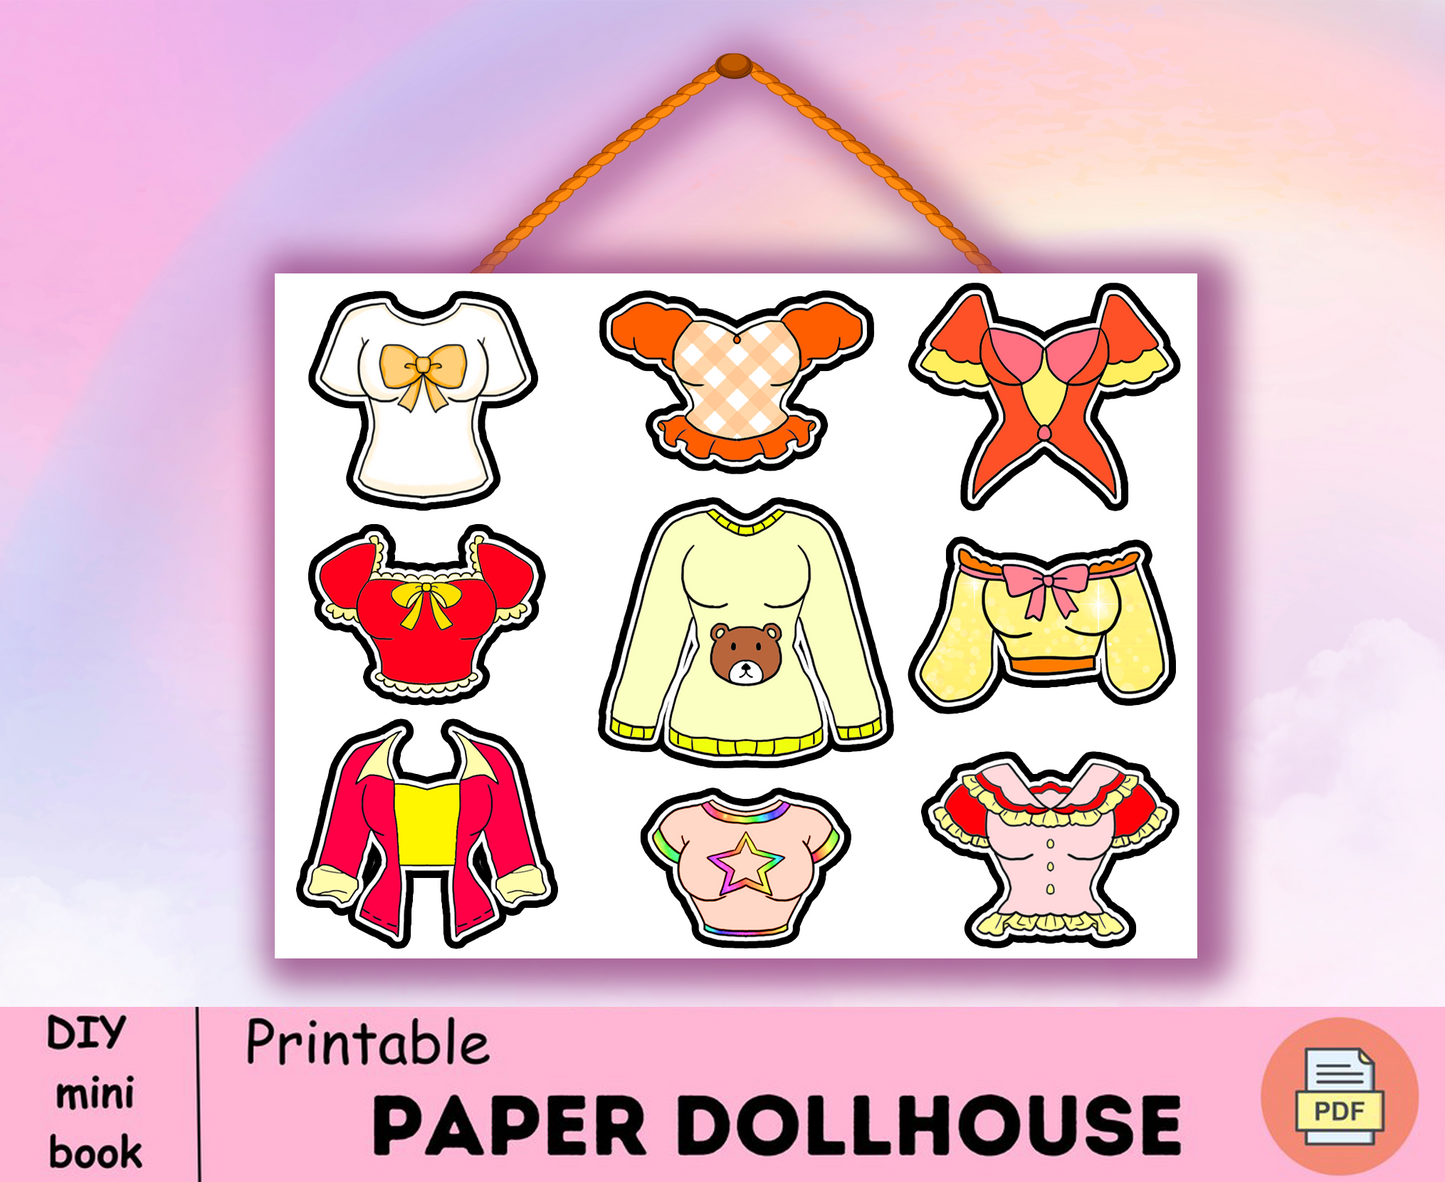 Barbie Handmade closet busy book printable 🌈 Wardrobe busy book shape for paper doll | Princess Outfits 🌈 Woa Doll Crafts